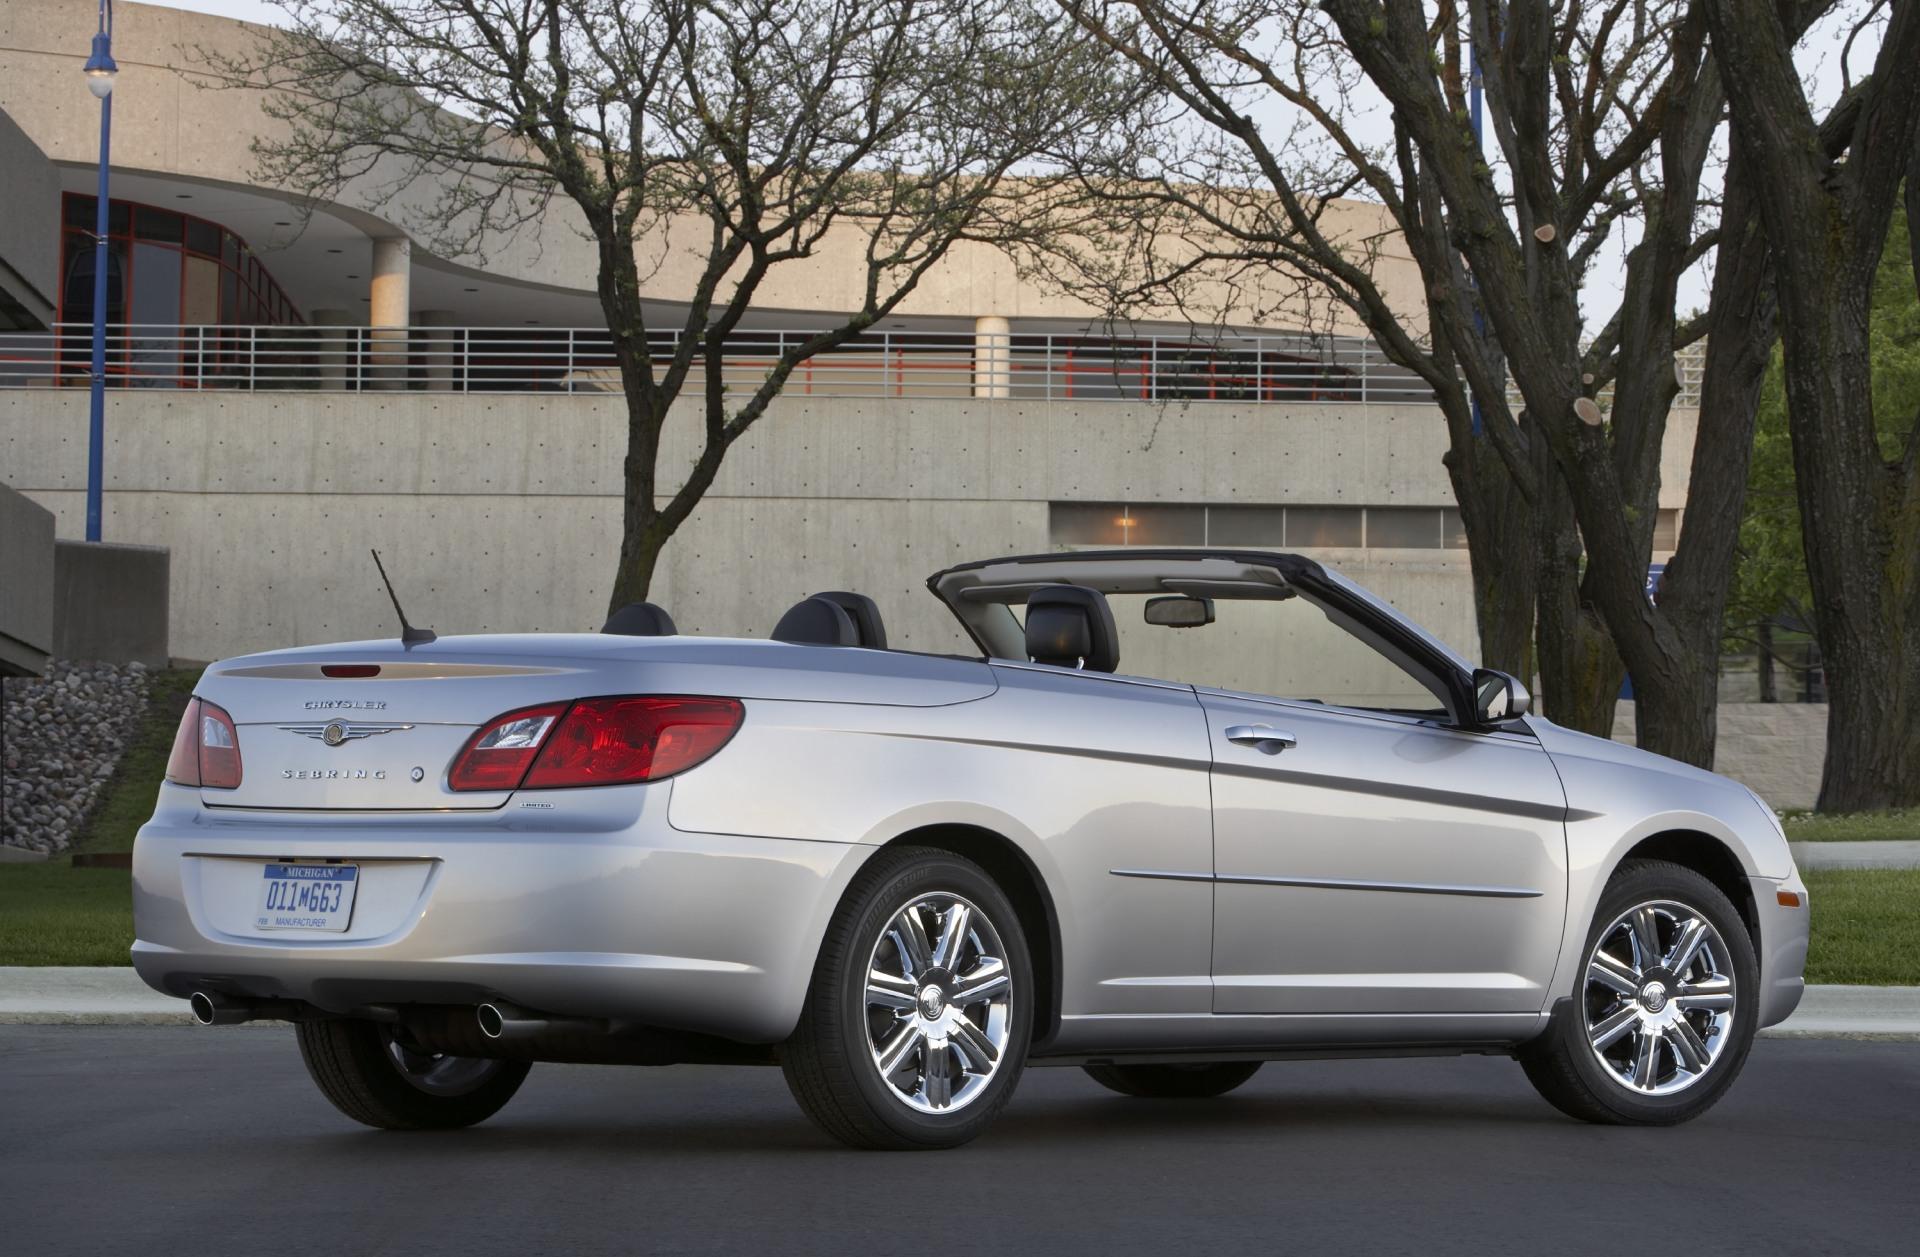 Replacement convertible top for chrysler sebring #3